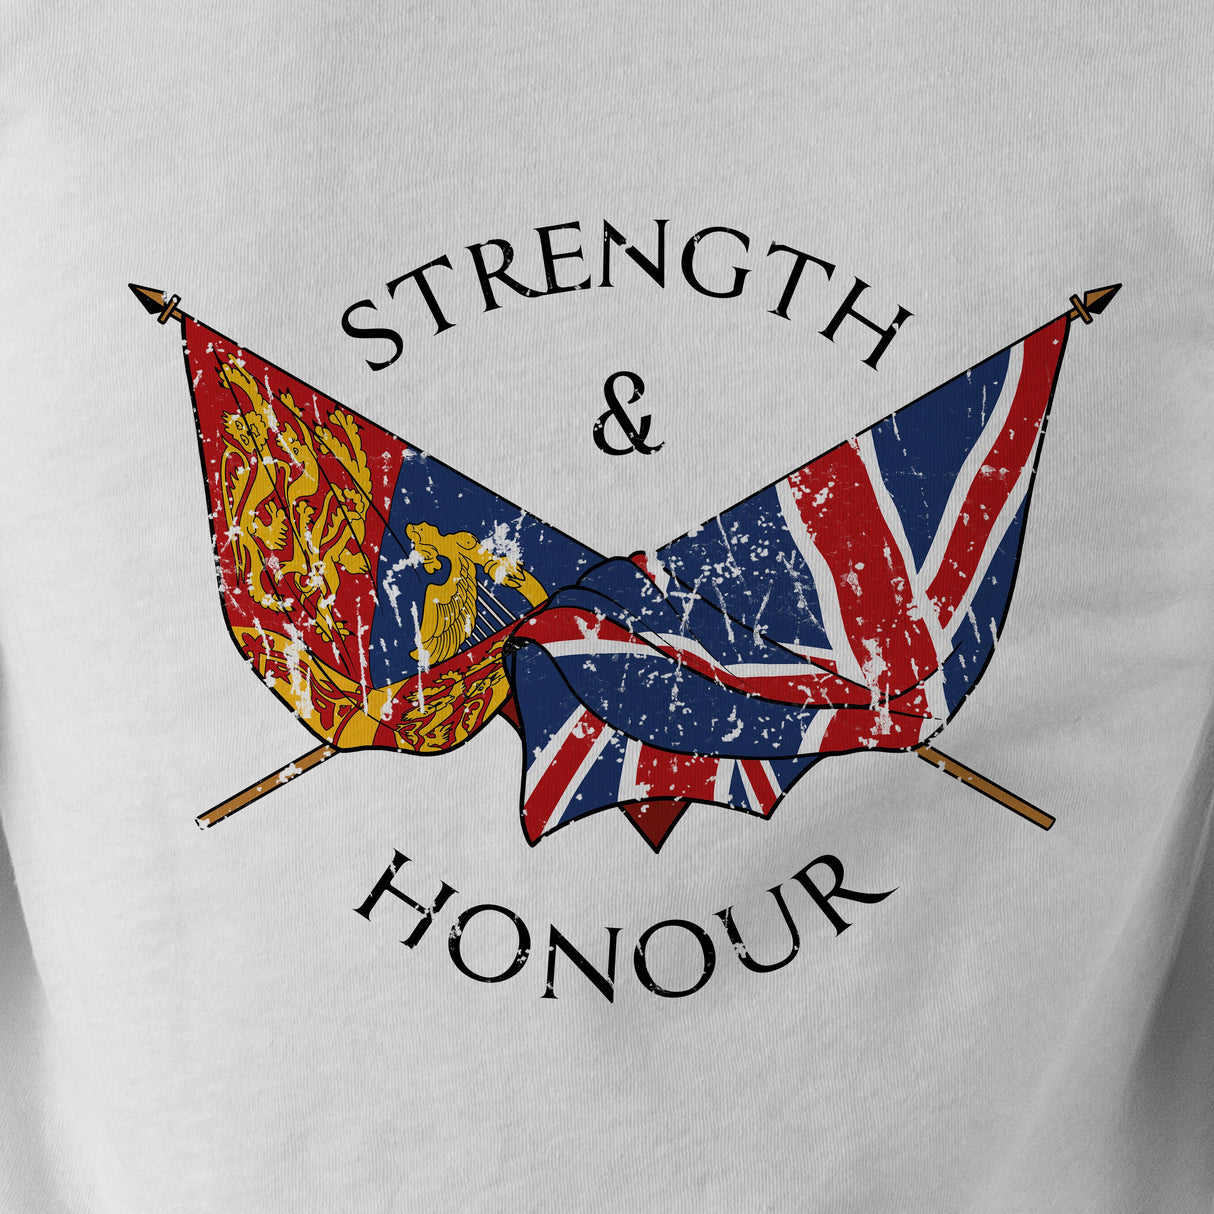 STRENGTH AND HONOUR FLAGS - Force Wear HQ